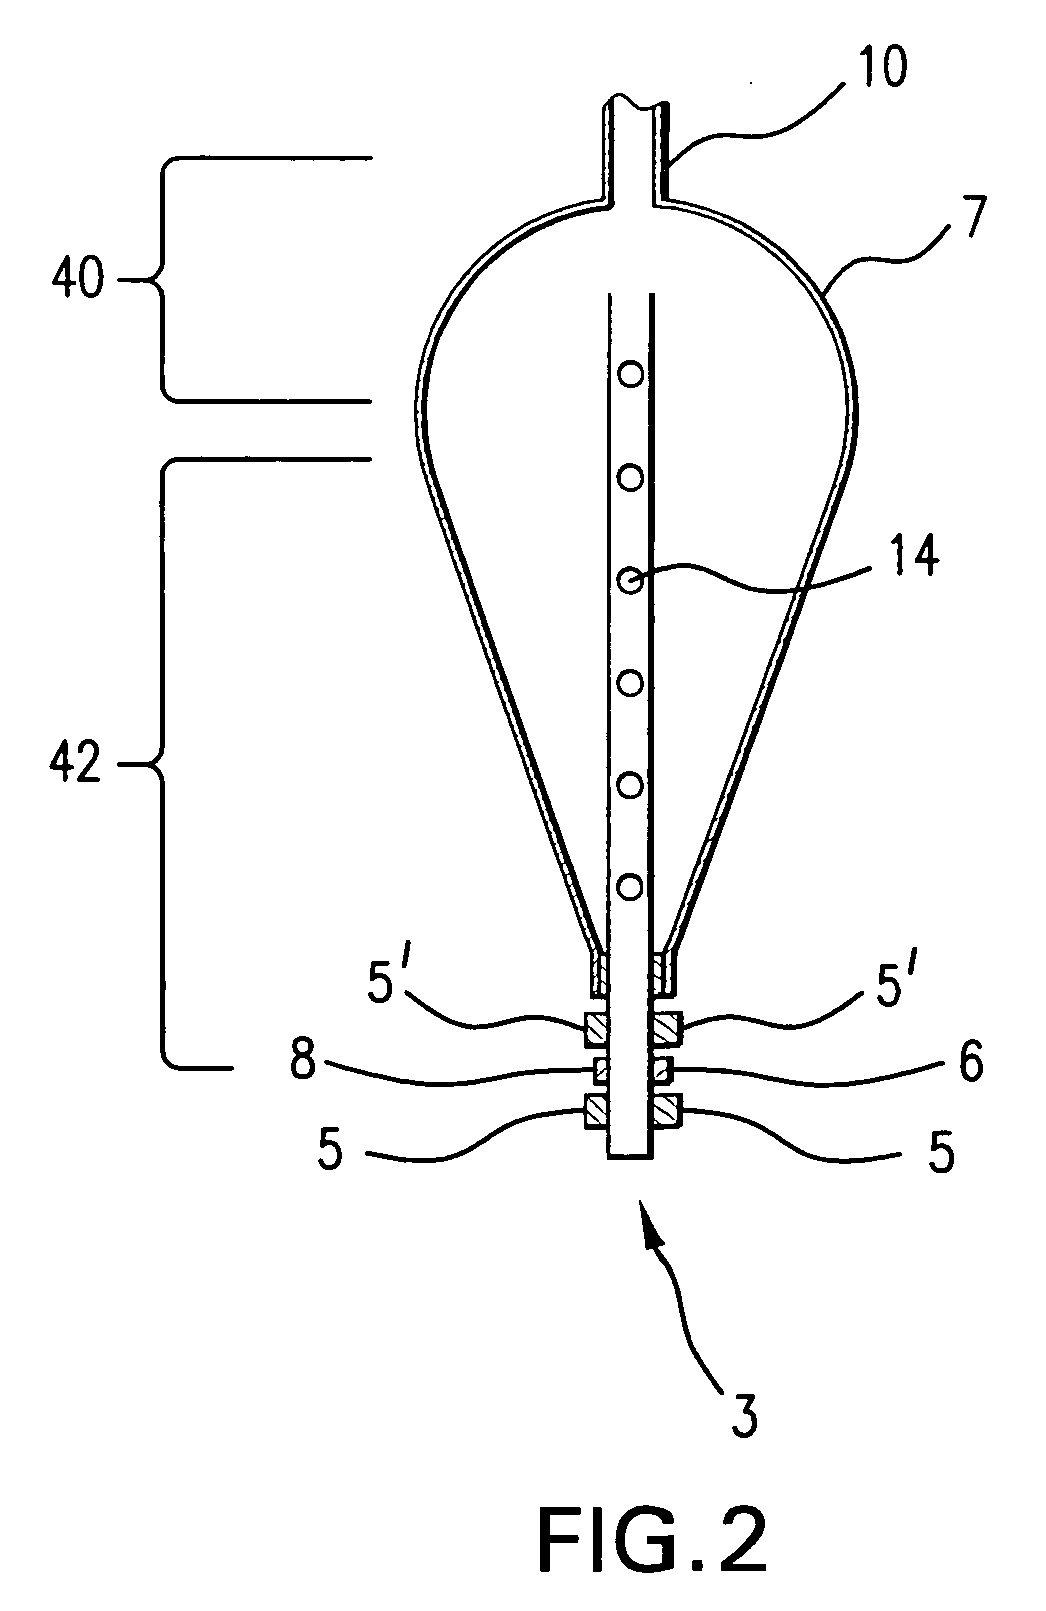 Intra-ventricular cardiac assist device and related method of use